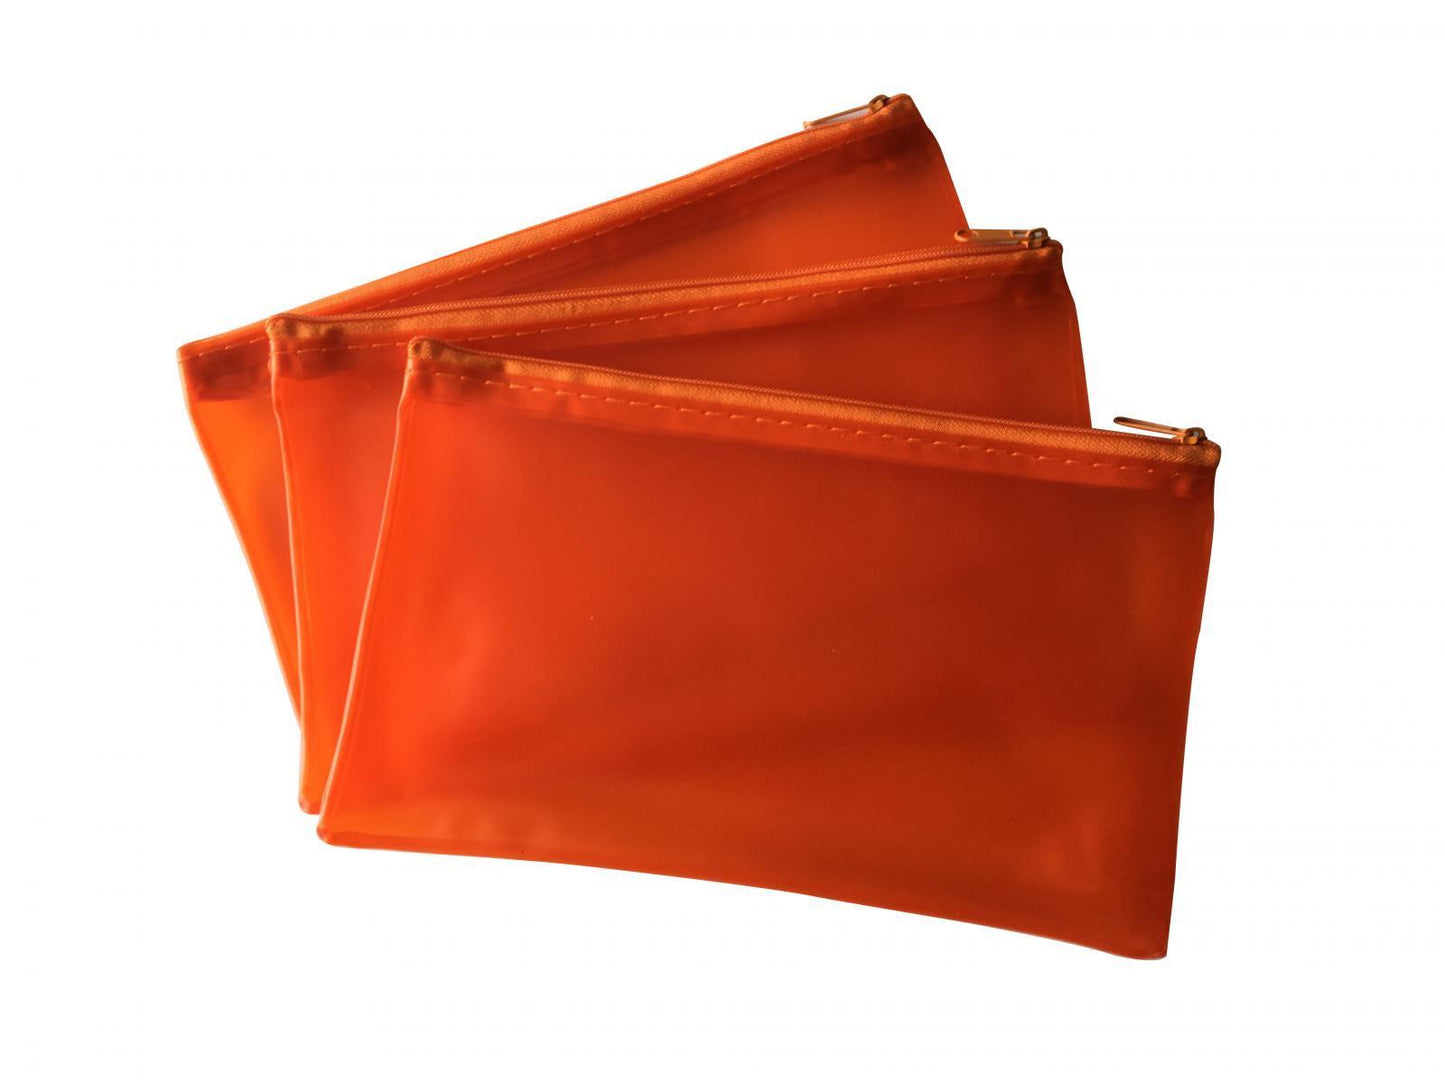 8x5" Frosted Orange Pencil Case - See Through Exam Clear Translucent